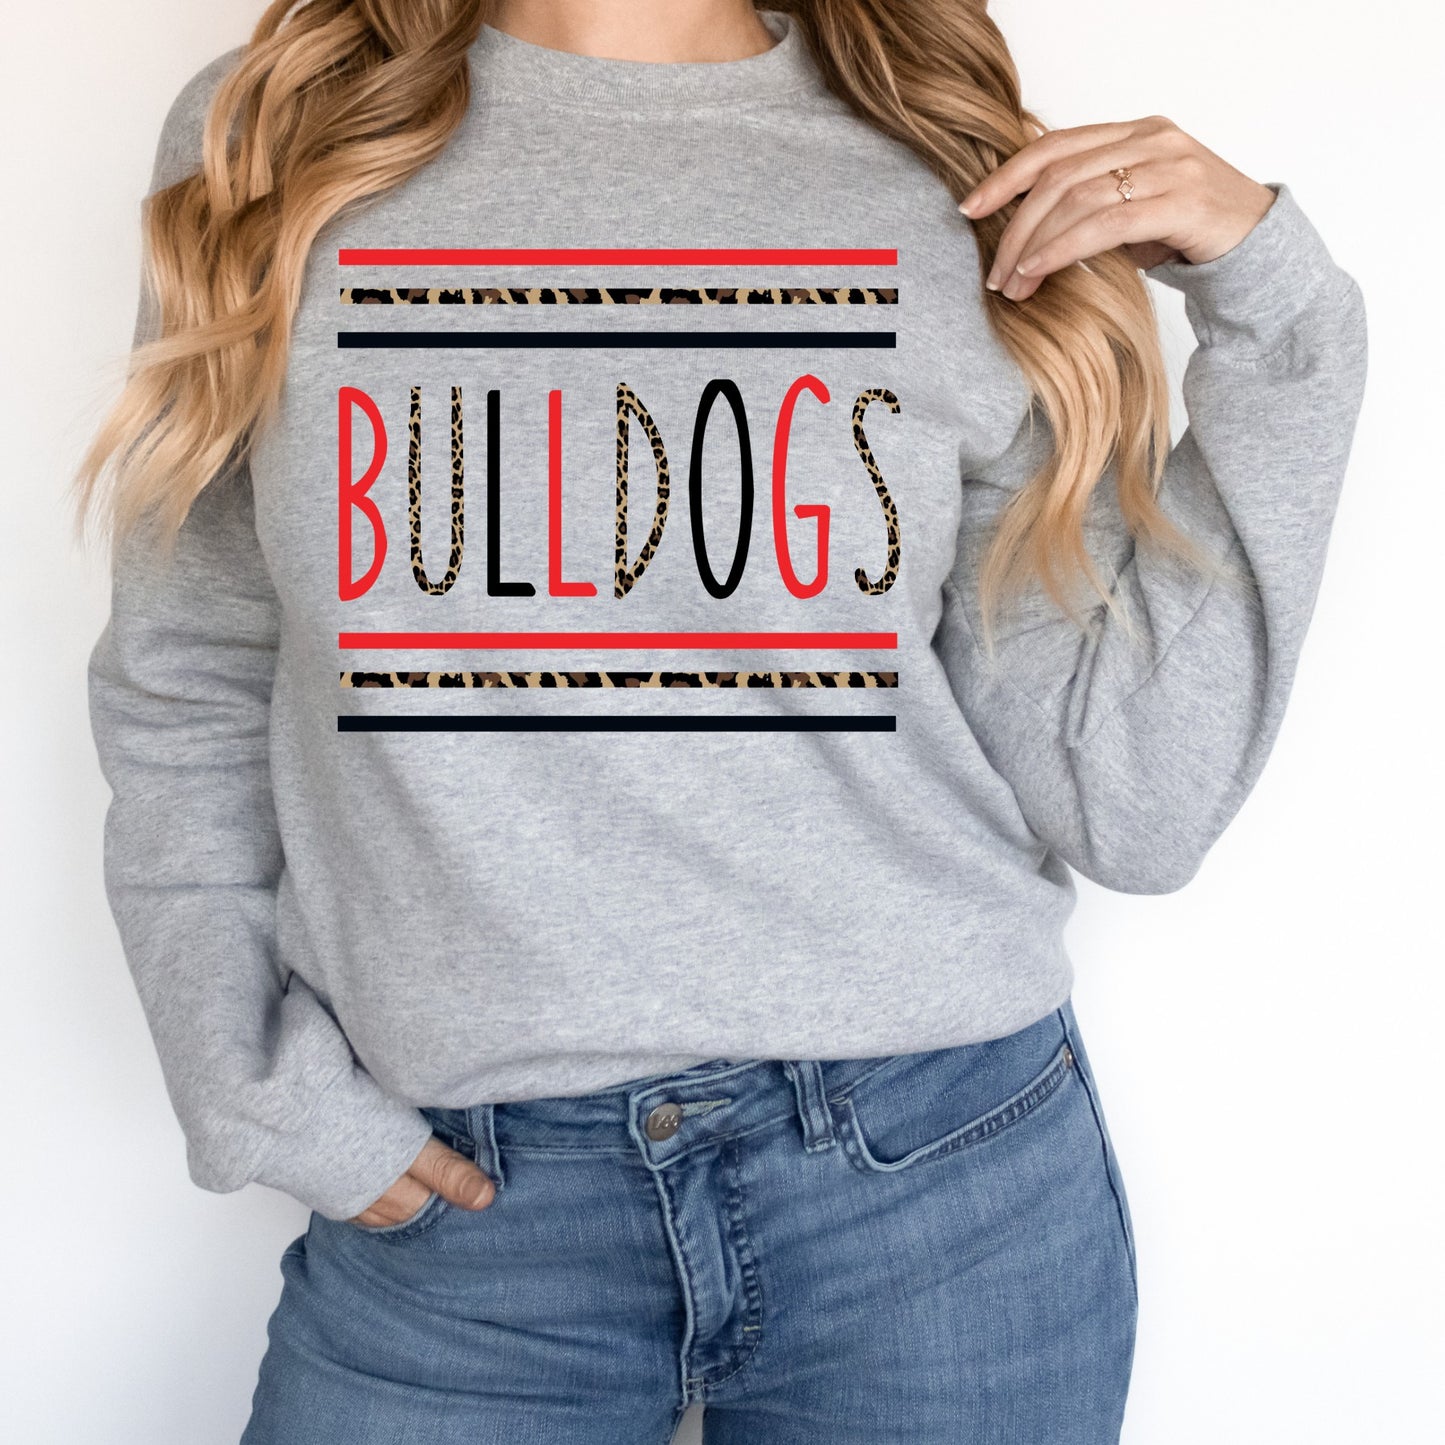 Bulldogs Black/Red/Leopard Graphic Tee